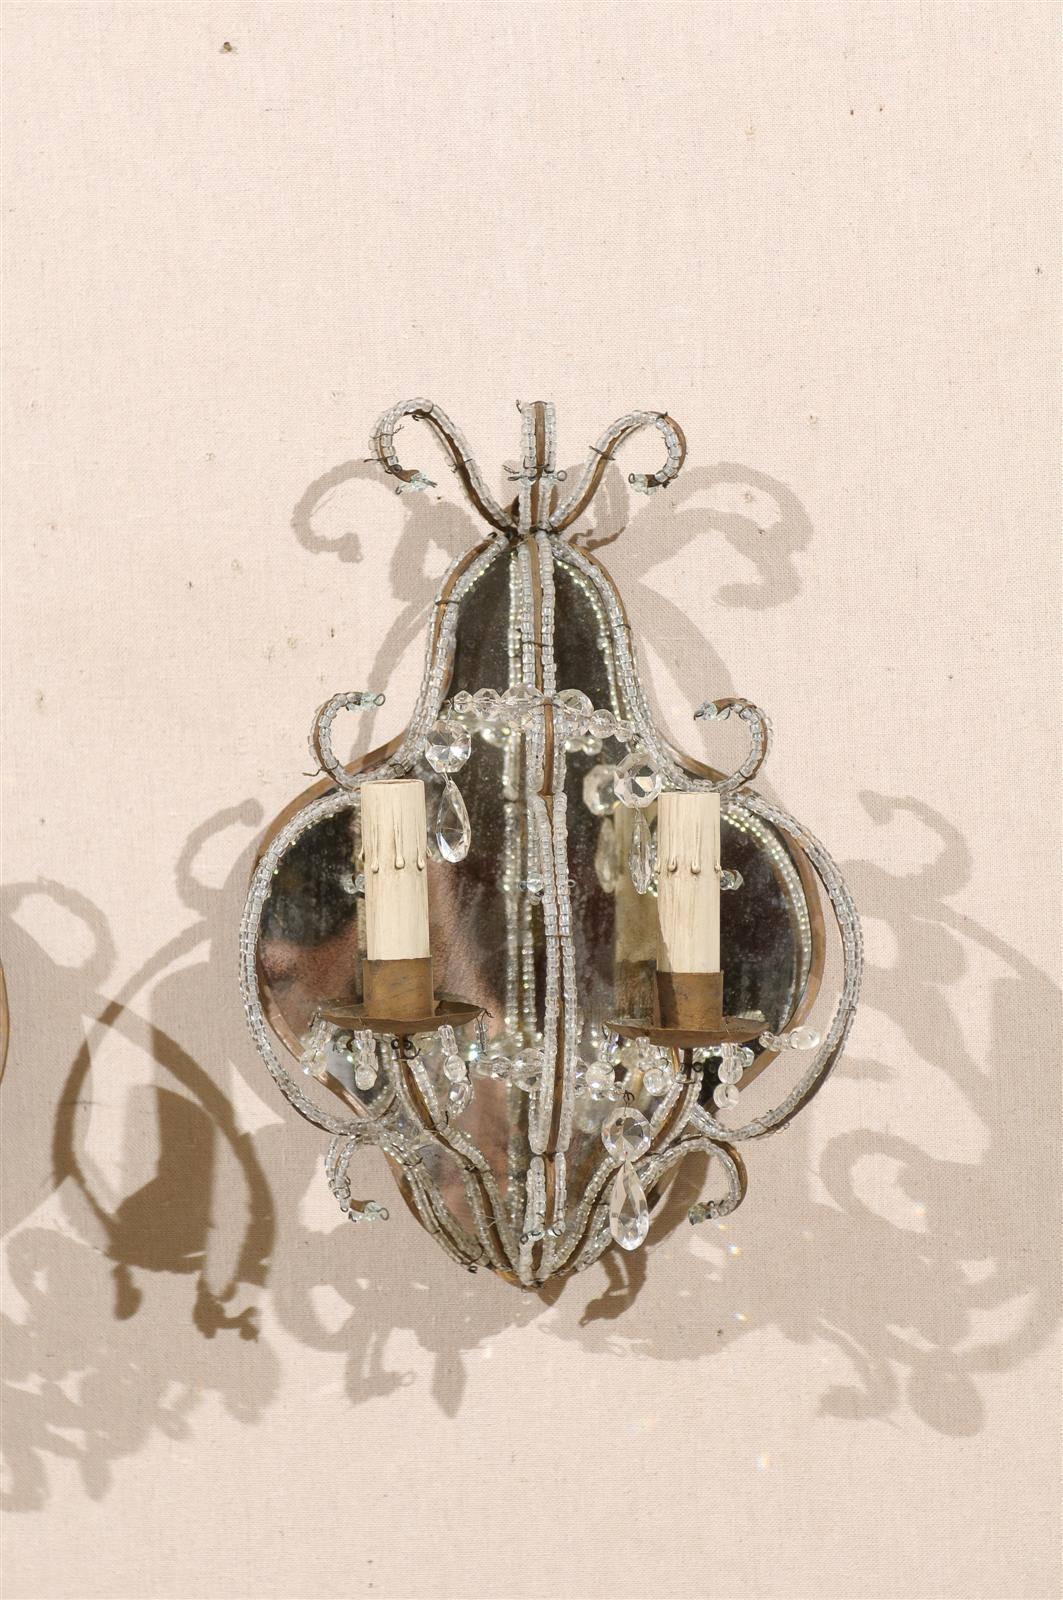 20th Century Pair of Italian Mirrored Sconces with Elegant Beaded Armature and Scrolls